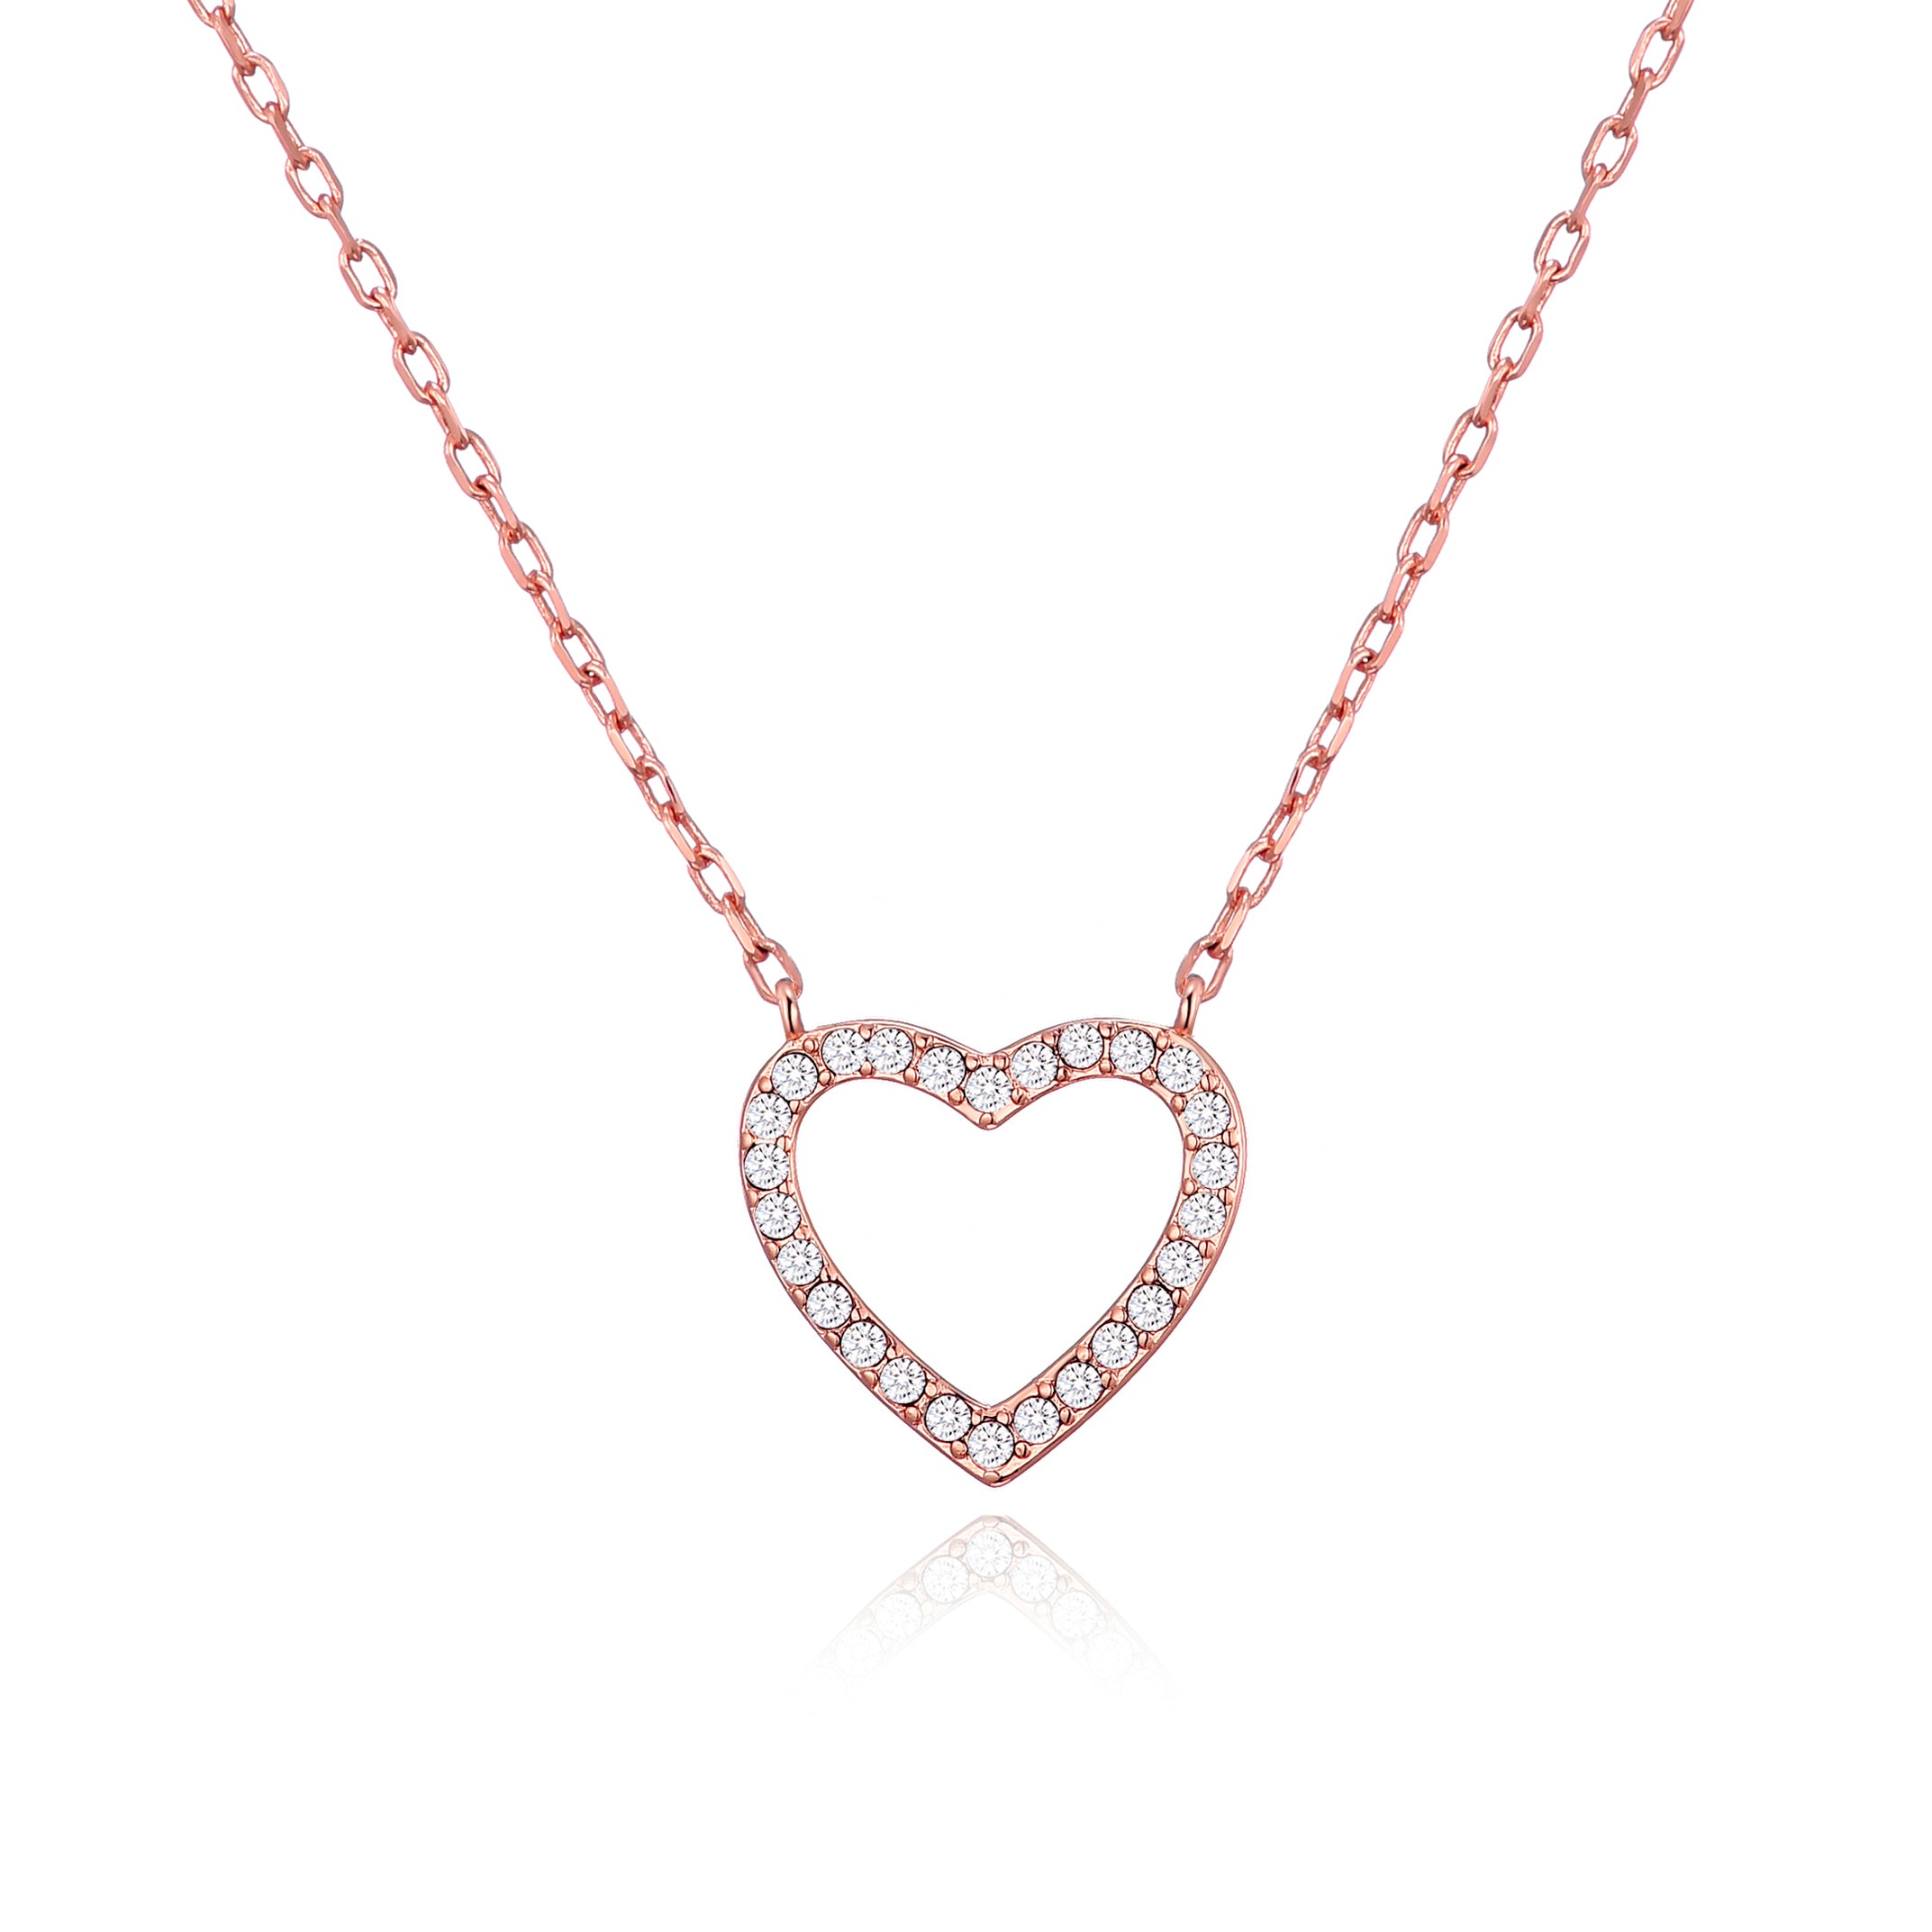 Rose Gold Plated Open Heart Necklace Created with Zircondia® Crystals by Philip Jones Jewellery